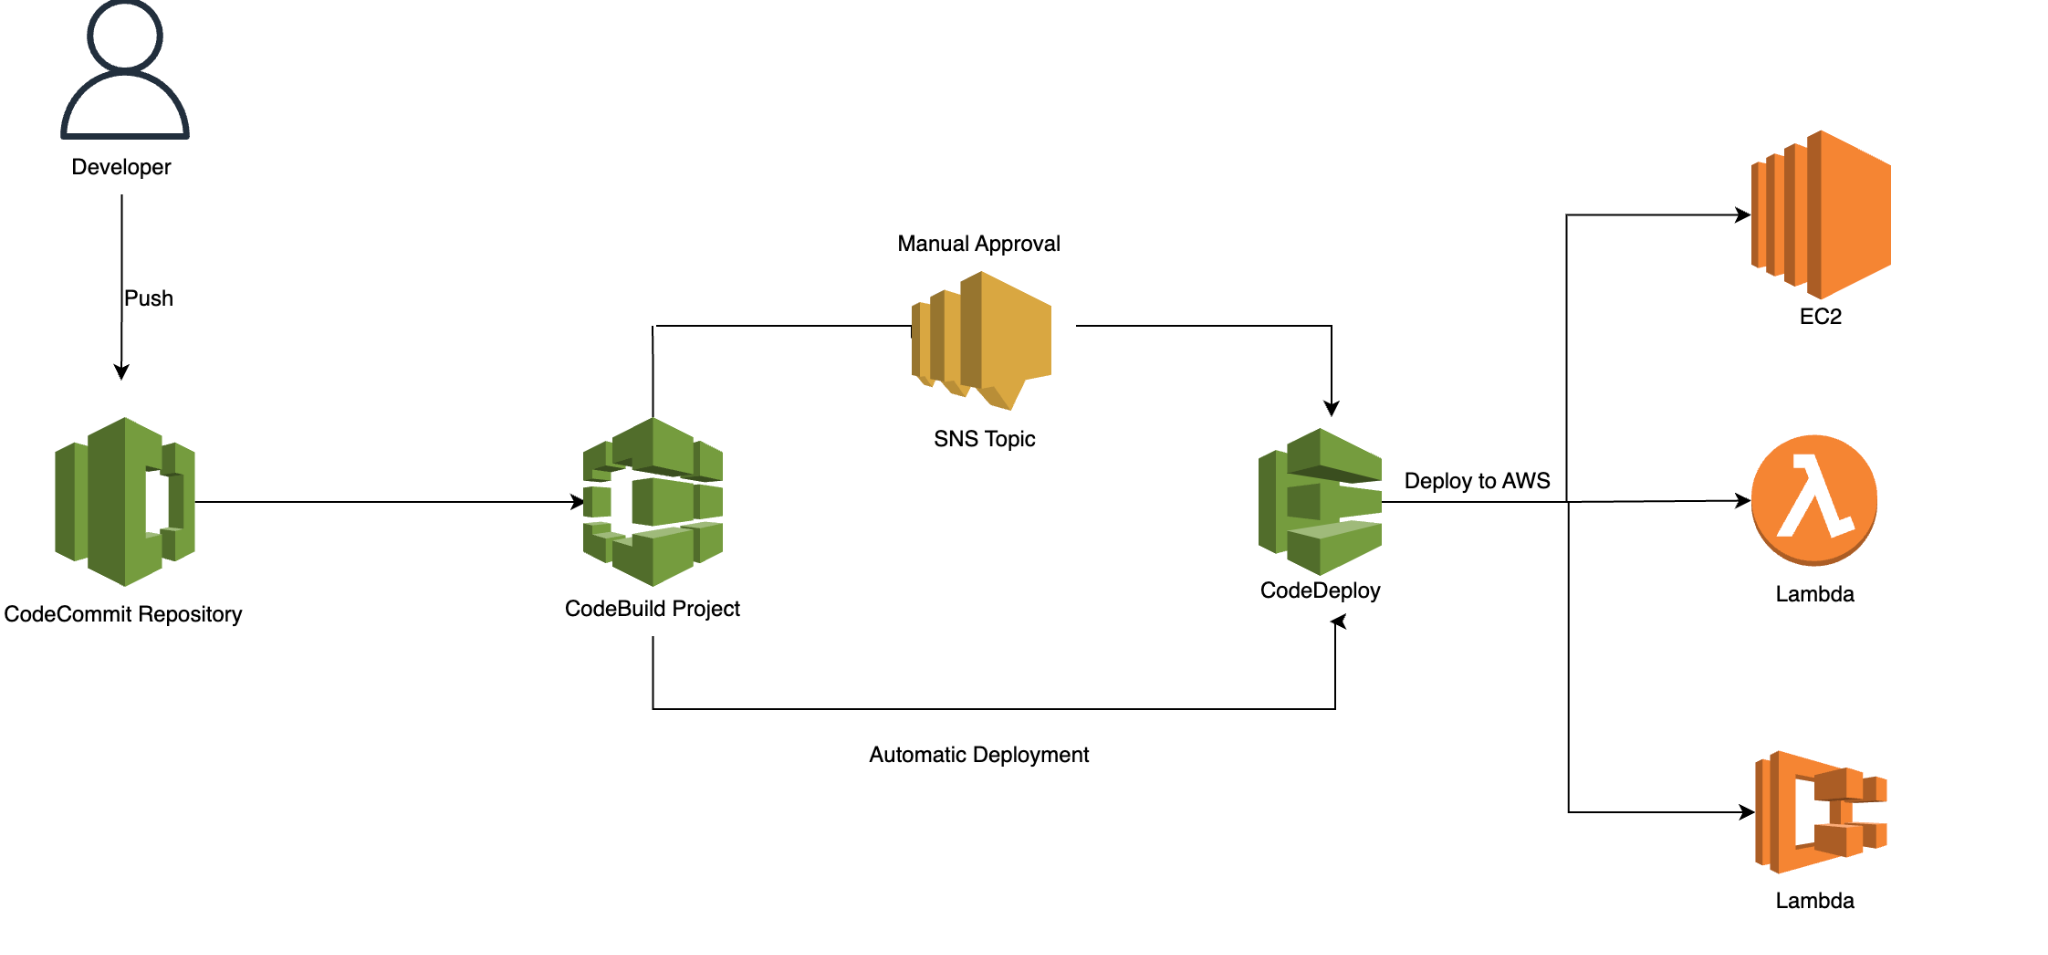 AWS Key Management Service is another service used to configure and manage your cryptographic keys across your environment and other AWS services. KMS can be automated directly on the service itself, which you can use to create, rotate and destroy keys. All the implementations we have gone through will work if you exclusively use AWS. But what if you’re running a cloud-hybrid infrastructure with multiple cloud providers? That’s where open-source Cloud Security Posture Management (CSPM) solutions like Paladin Cloud come in. Integrating an external CSPM comes with a bundle of benefits. Using Paladin Cloud as an example, you get: Continuous Asset Discovery Continuous security policy evaluation Detailed Reporting Easy to use Self-Service portal Custom policies and custom auto-fix actions Ability to create multiple compliance domains Unlimited AWS, Azure, and GCP Accounts And many more, which you can find in this GitHub repository.